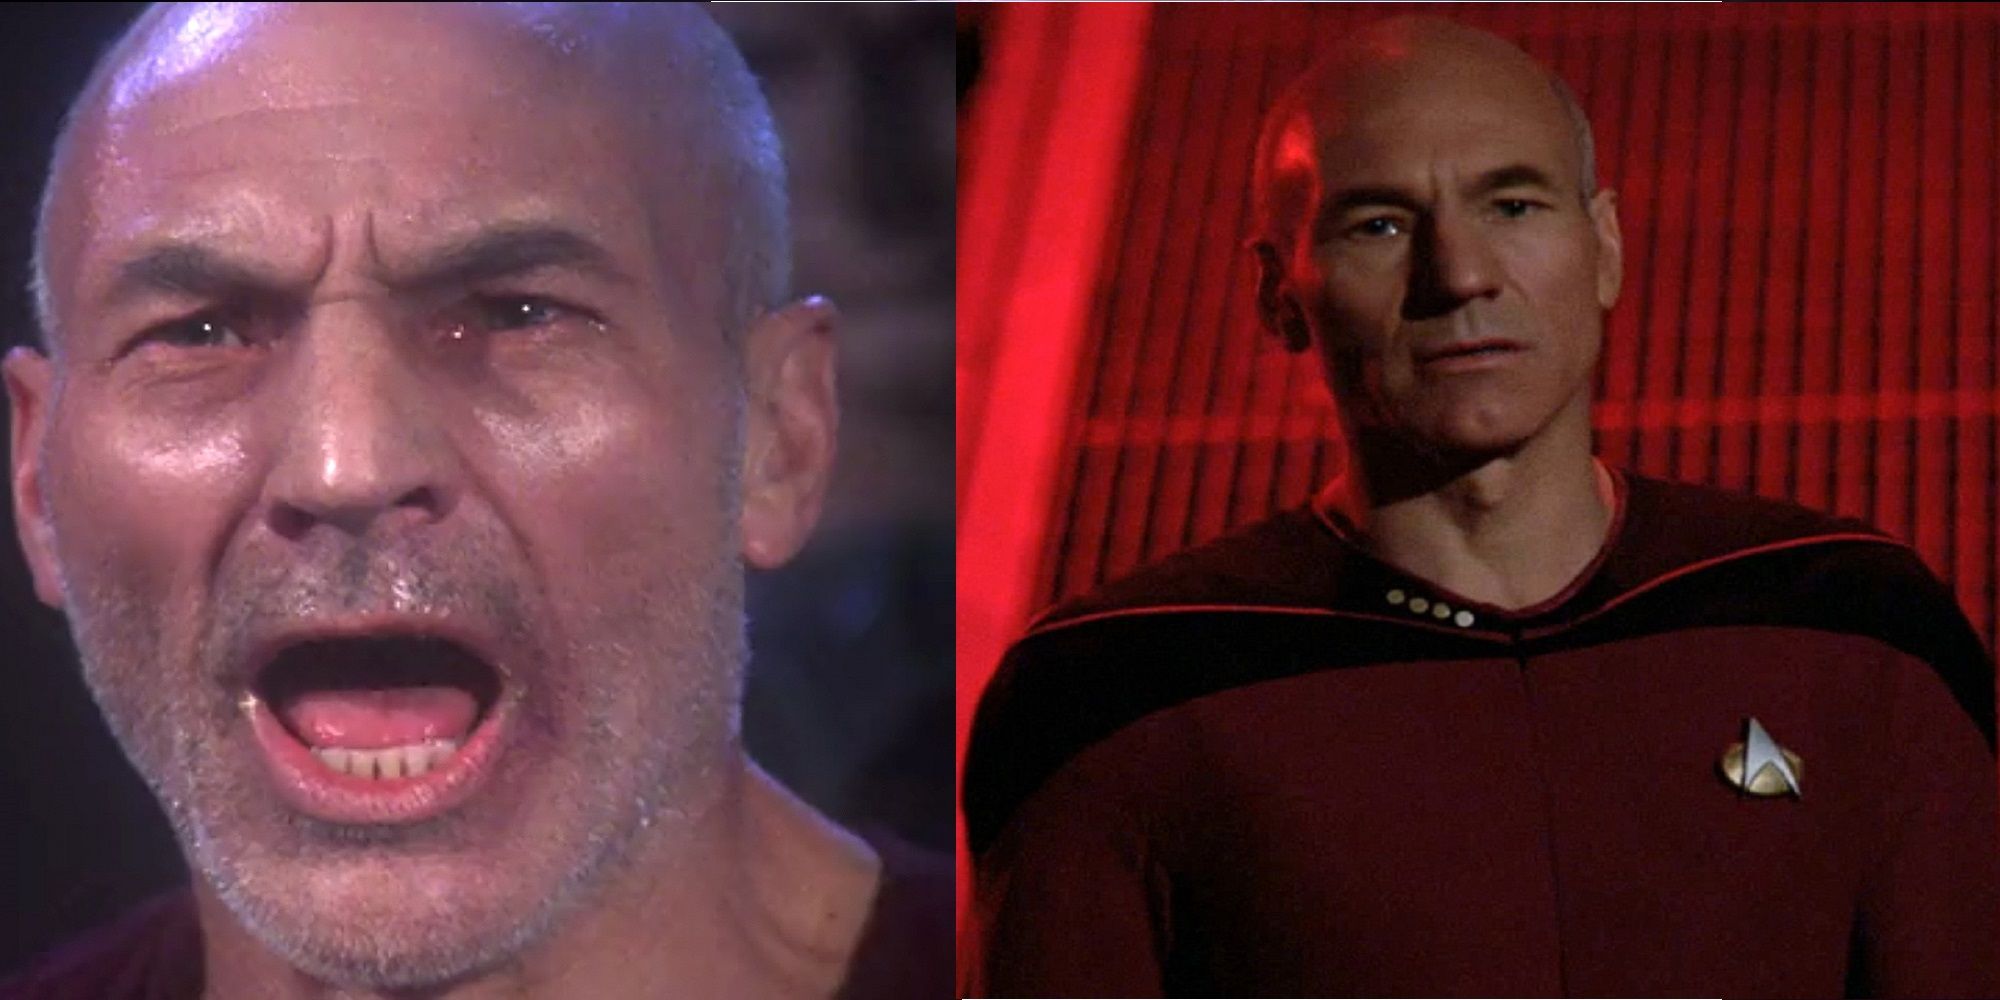 split image featuring picard shouting and captain picard with pensive face